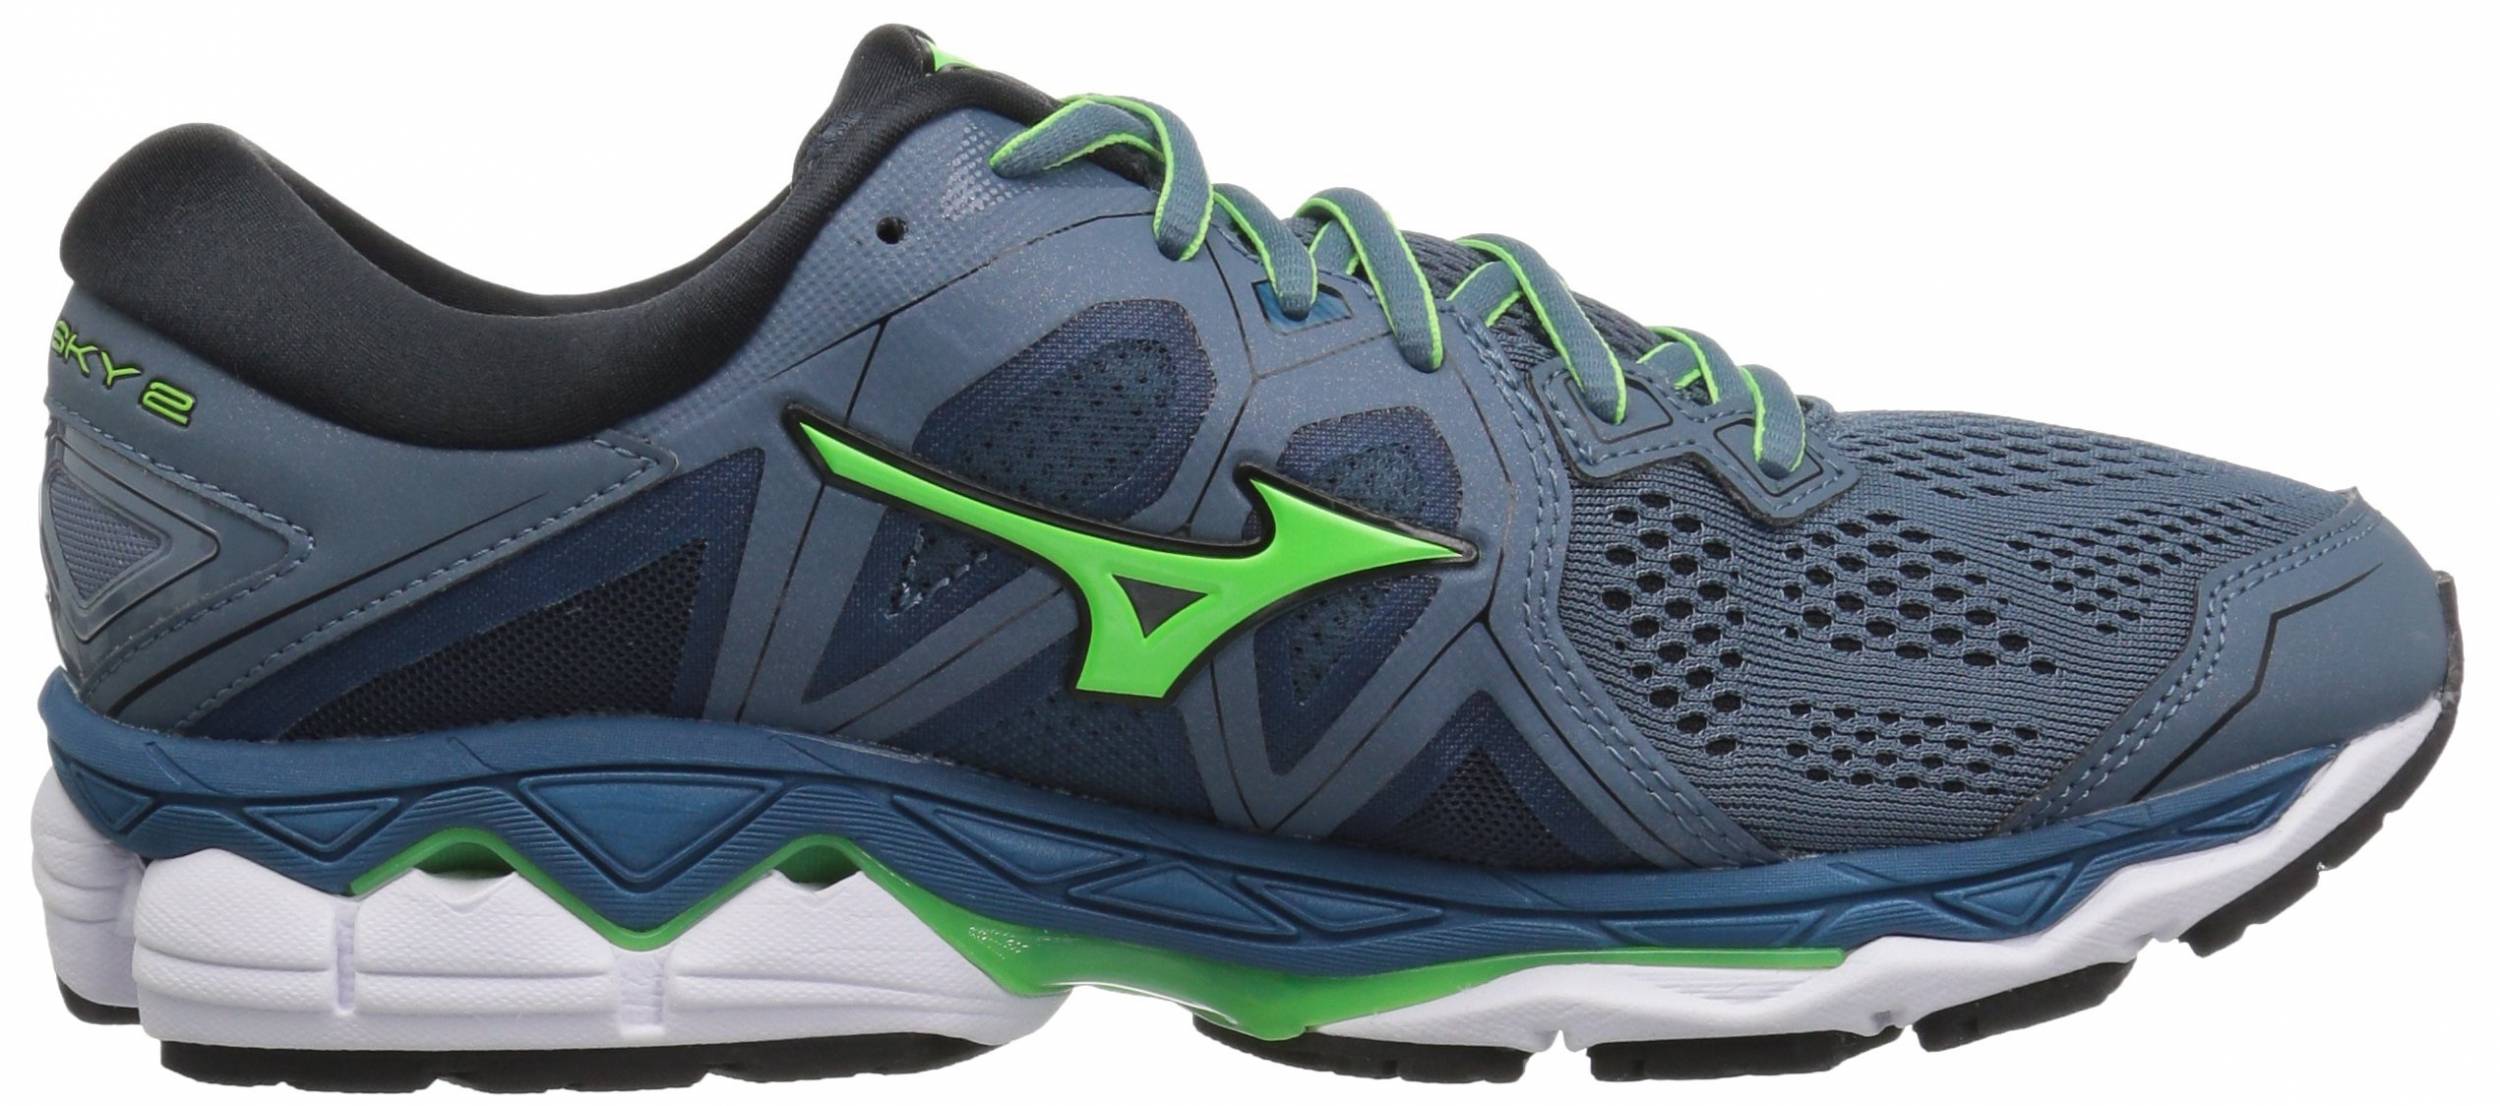 Mizuno Wave Sky 2 Review 2022, Facts 